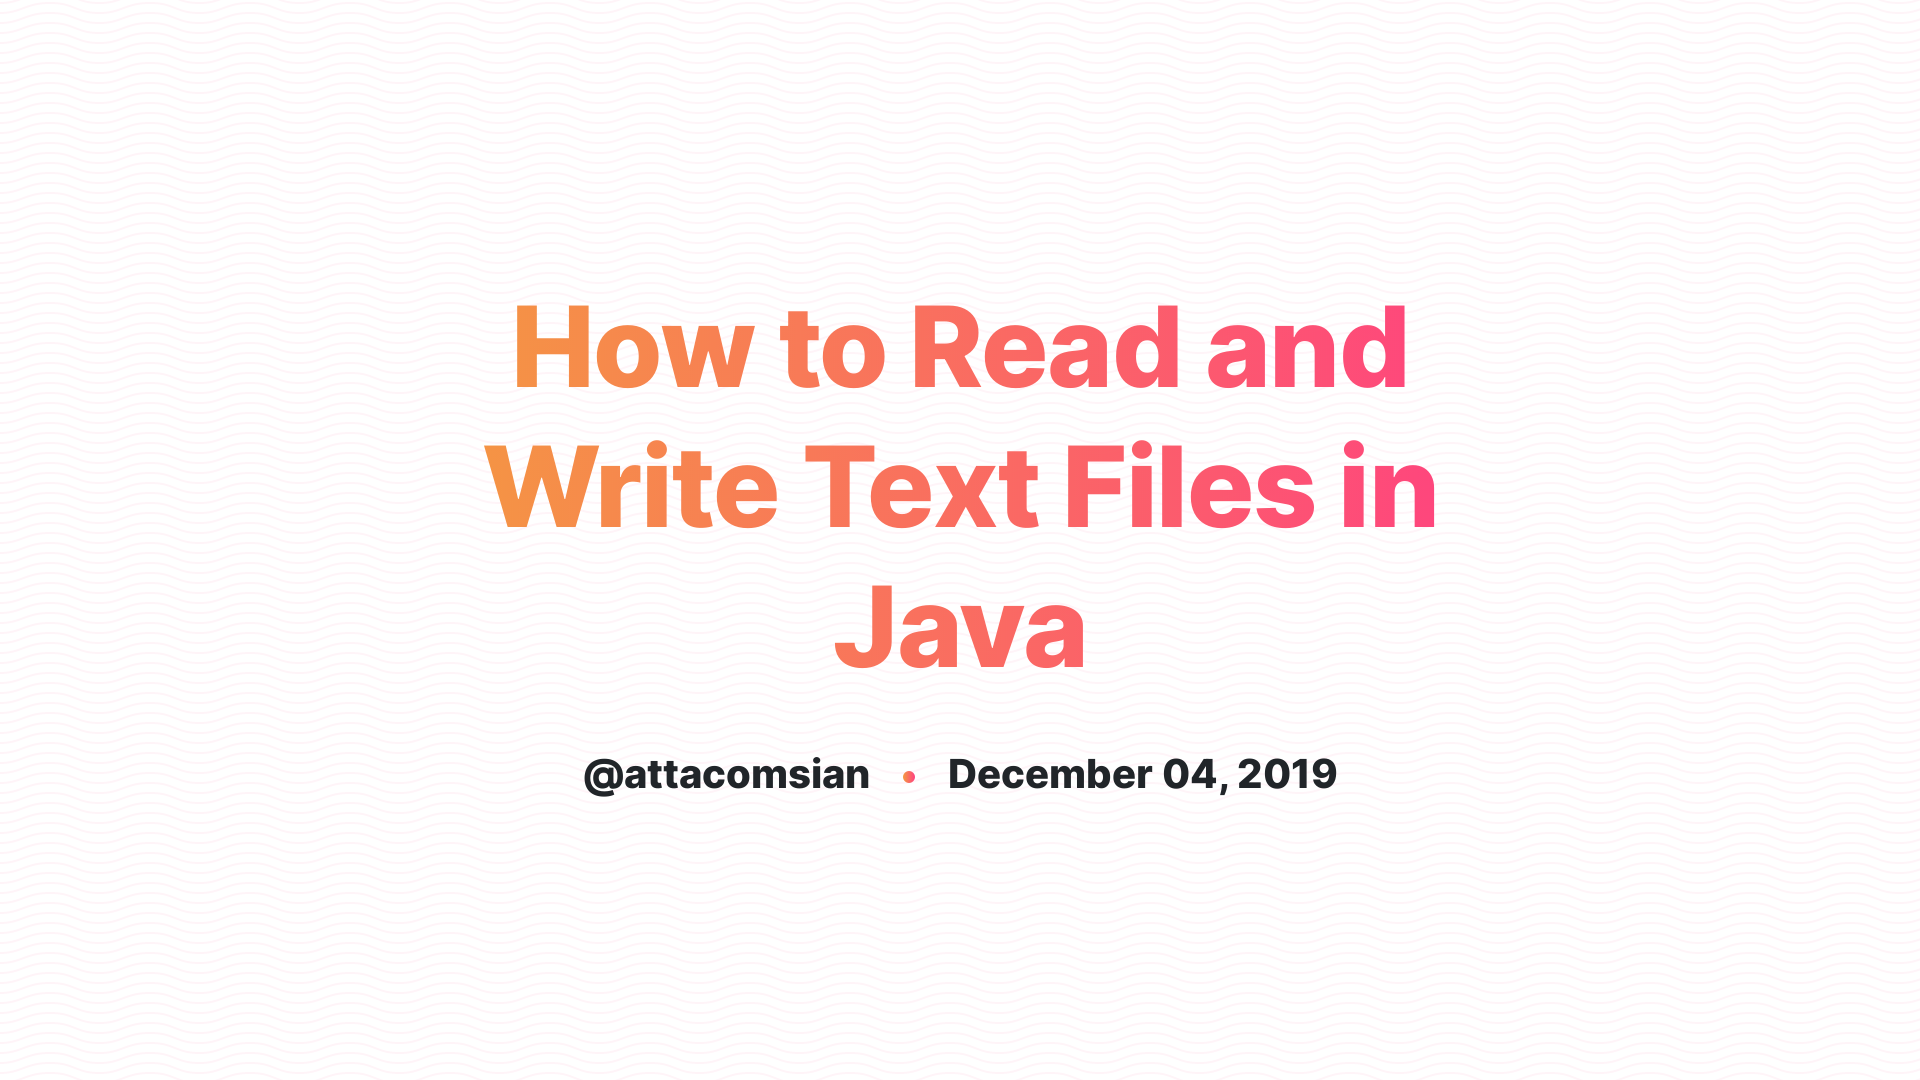 How to Read and Write Text Files in Java